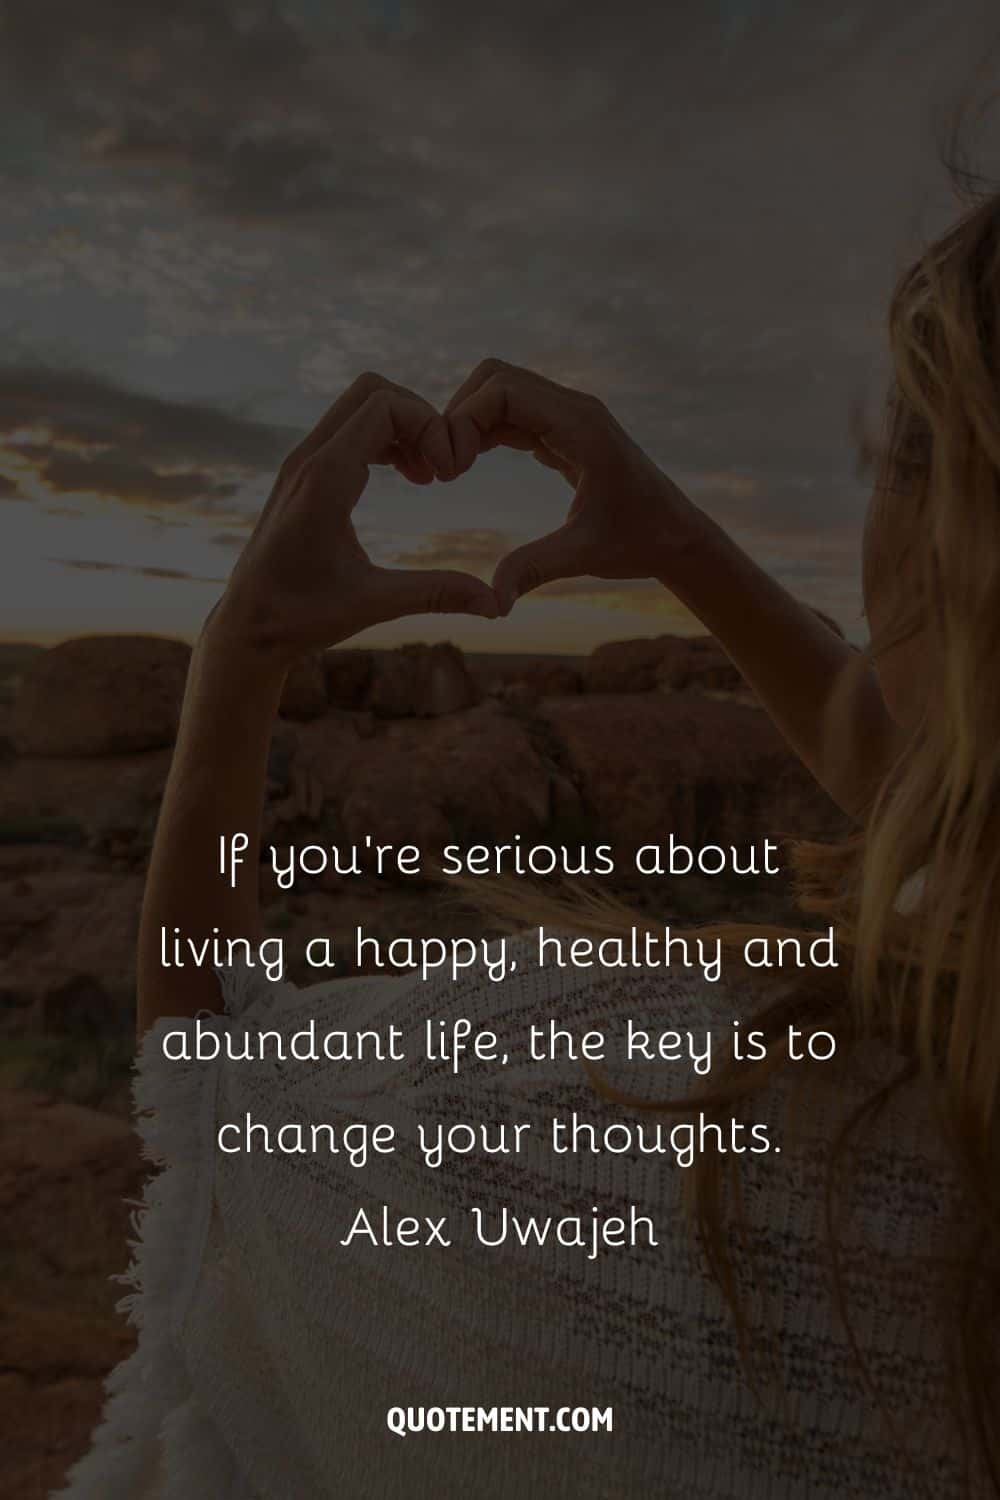 If you're serious about living a happy, healthy and abundant life, the key is to change your thoughts.